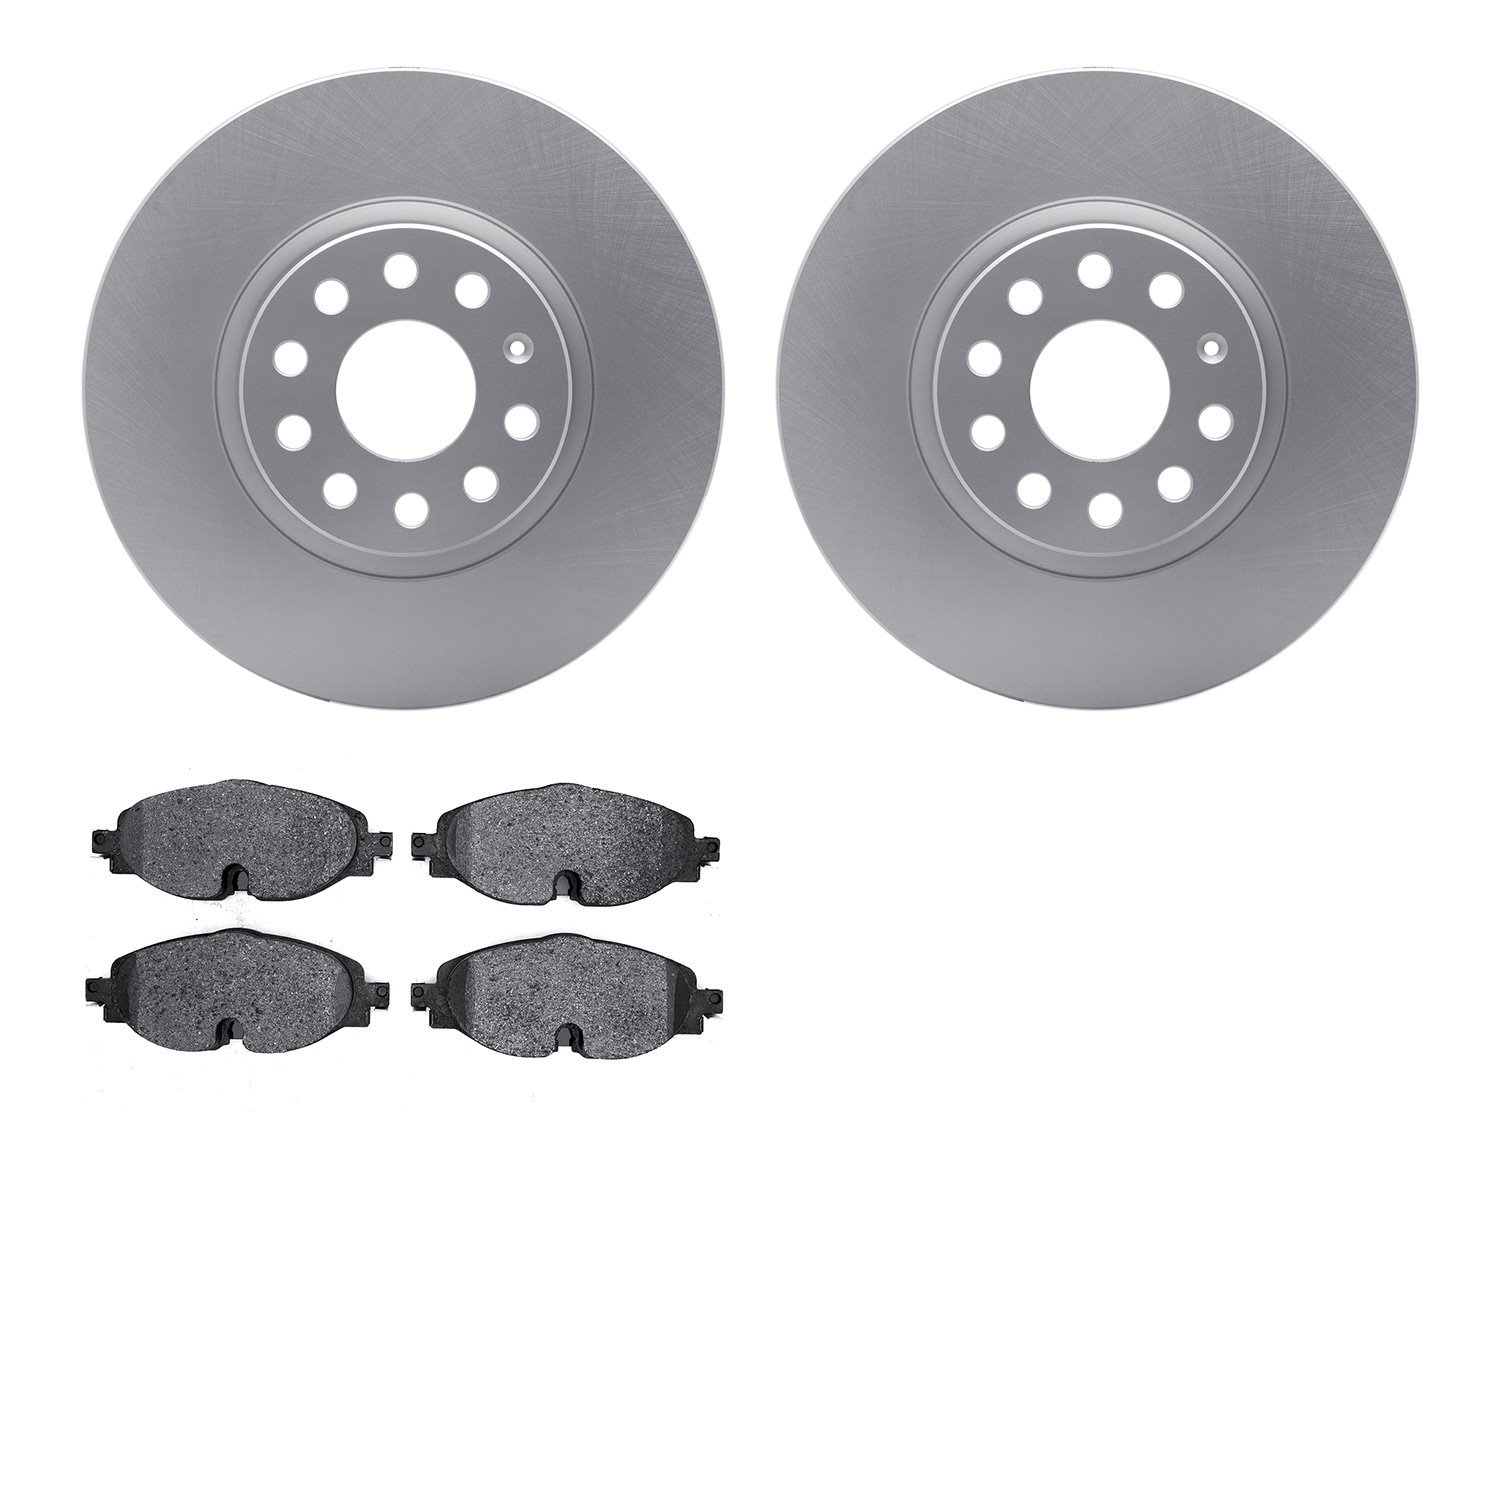 4302-74015 Geospec Brake Rotors with 3000-Series Ceramic Brake Pads Kit, Fits Select Multiple Makes/Models, Position: Front